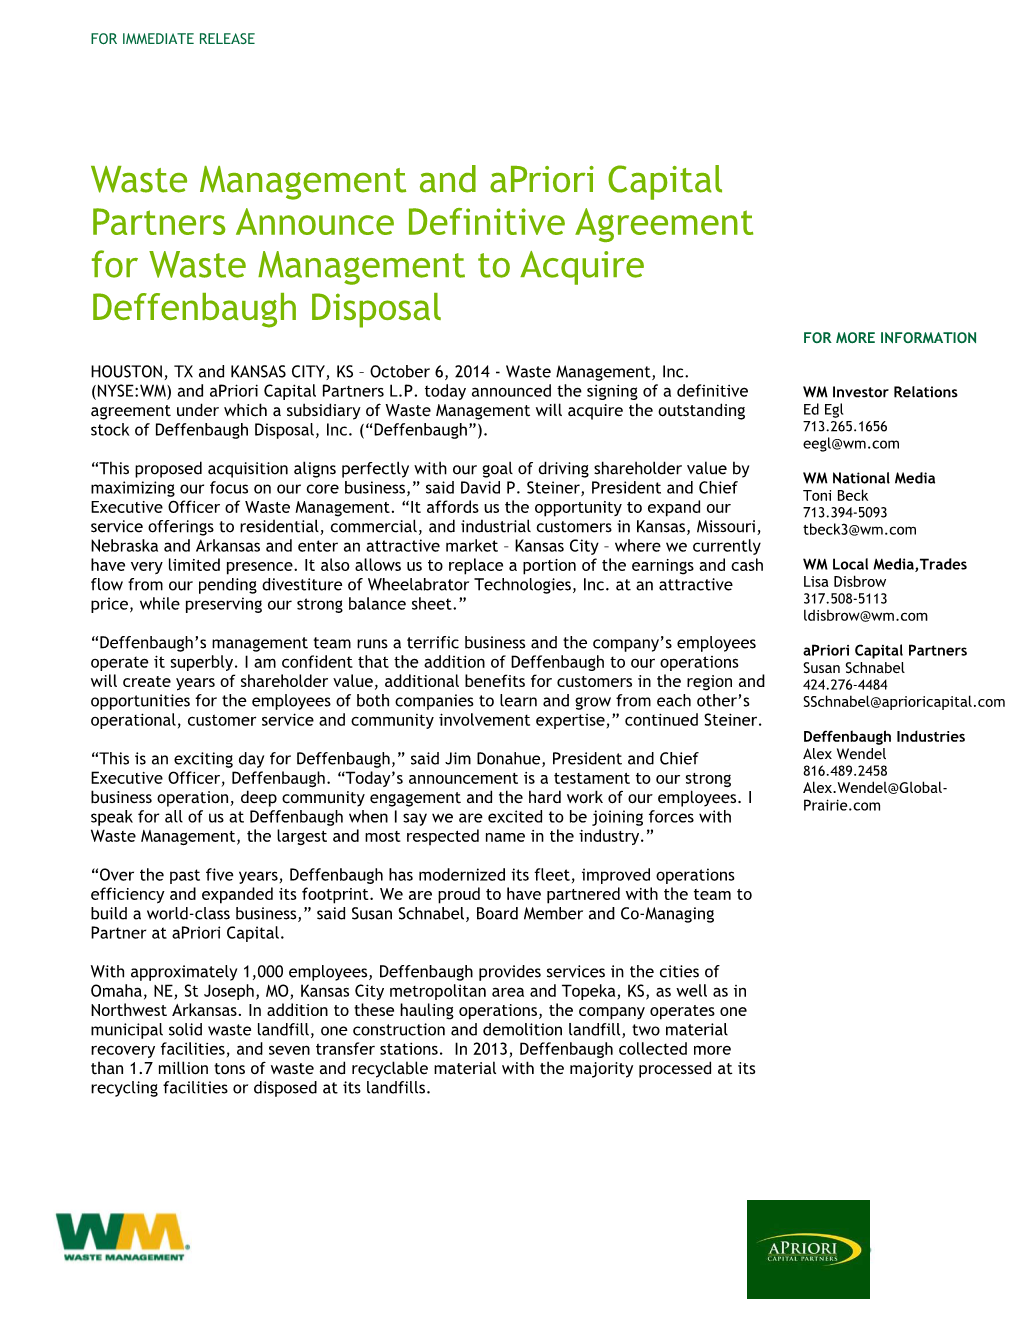 Waste Management and Apriori Capital Partners Announce